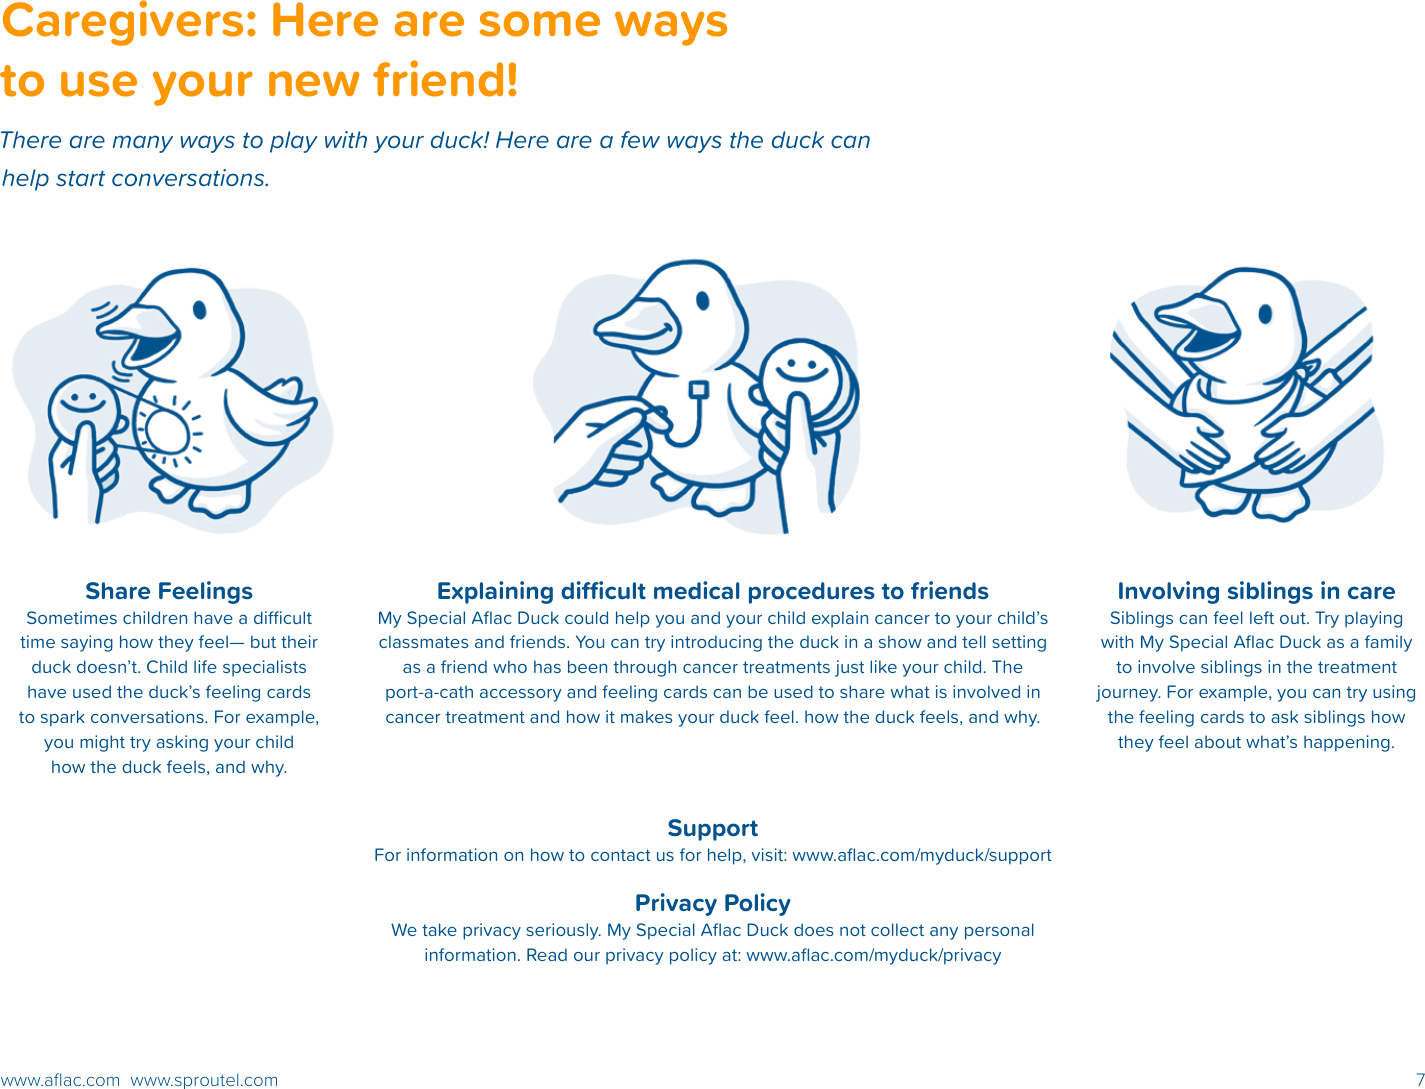 7www.aﬂac.com  www.sproutel.comCaregivers: Here are some ways to use your new friend!There are many ways to play with your duck! Here are a few ways the duck can help start conversations. Share FeelingsSometimes children have a dicult time saying how they feel— but their duck doesn’t. Child life specialists have used the duck’s feeling cards to spark conversations. For example, you might try asking your child how the duck feels, and why.Explaining dicult medical procedures to friendsMy Special Aﬂac Duck could help you and your child explain cancer to your child’s classmates and friends. You can try introducing the duck in a show and tell setting as a friend who has been through cancer treatments just like your child. The port-a-cath accessory and feeling cards can be used to share what is involved in cancer treatment and how it makes your duck feel. how the duck feels, and why.SupportFor information on how to contact us for help, visit: www.aﬂac.com/myduck/supportPrivacy PolicyWe take privacy seriously. My Special Aﬂac Duck does not collect any personal information. Read our privacy policy at: www.aﬂac.com/myduck/privacyInvolving siblings in careSiblings can feel left out. Try playing with My Special Aﬂac Duck as a family to involve siblings in the treatment journey. For example, you can try using the feeling cards to ask siblings how they feel about what’s happening. 